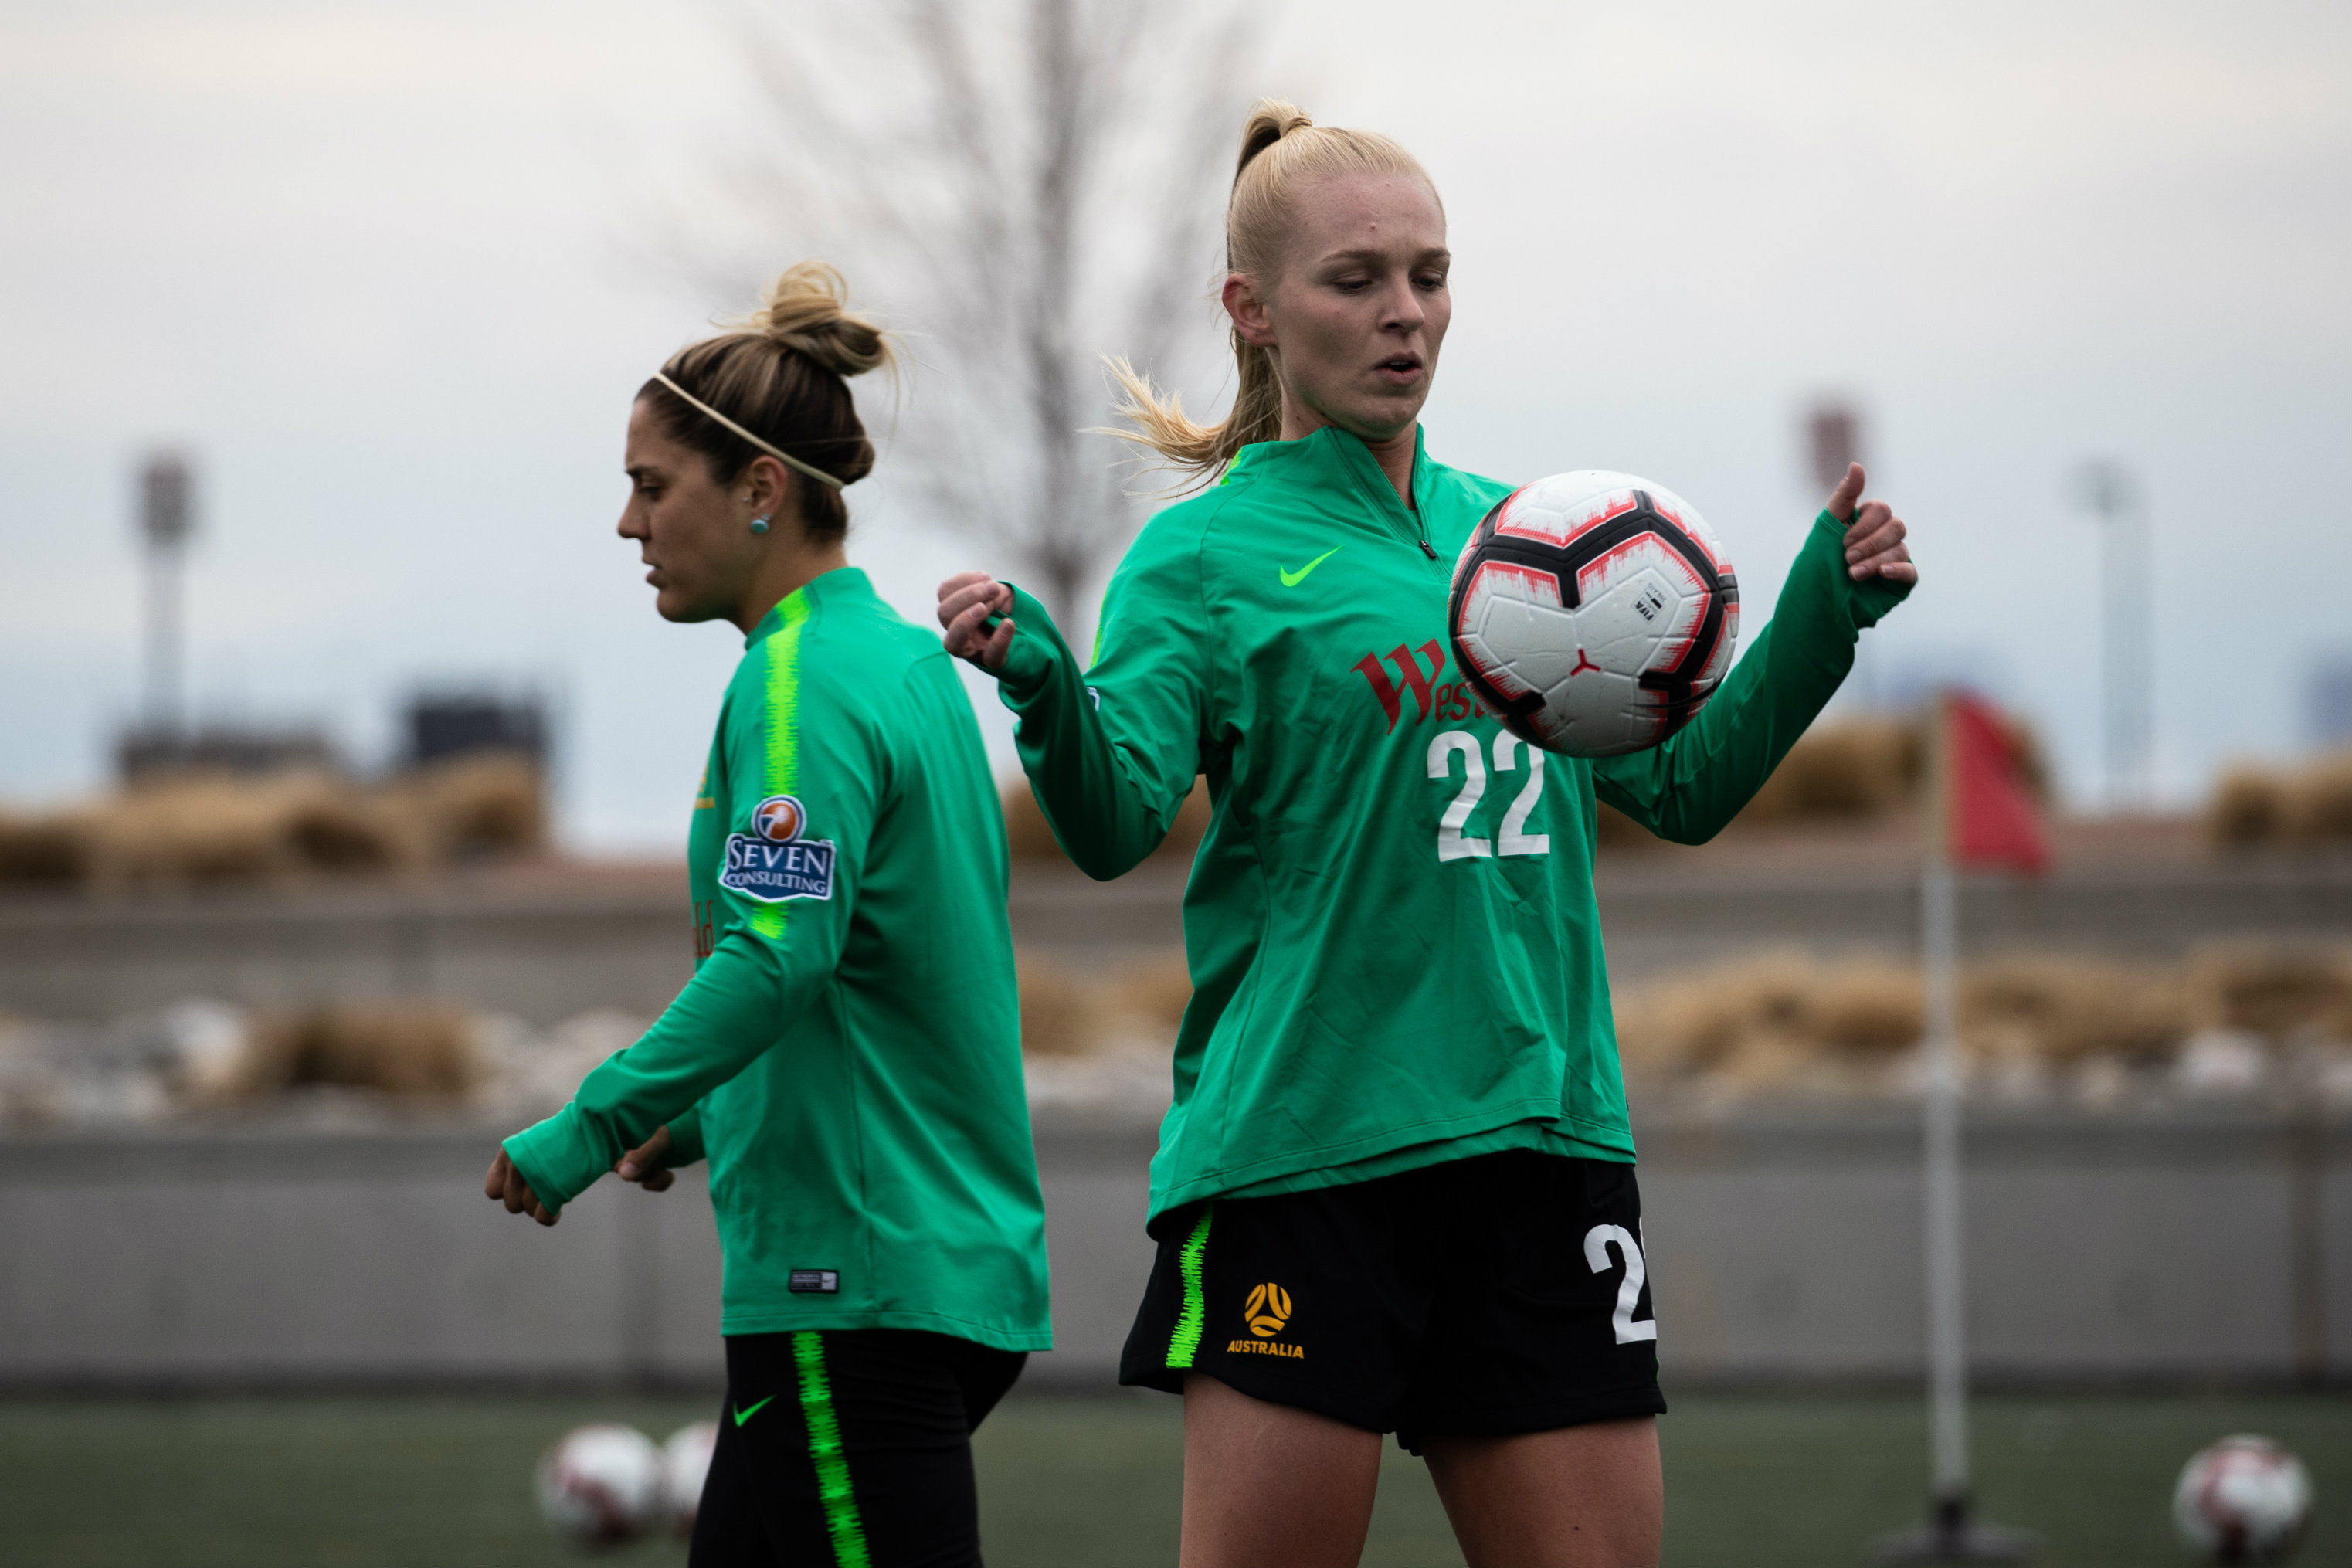 Liz Ralston controls the ball during training in Denver